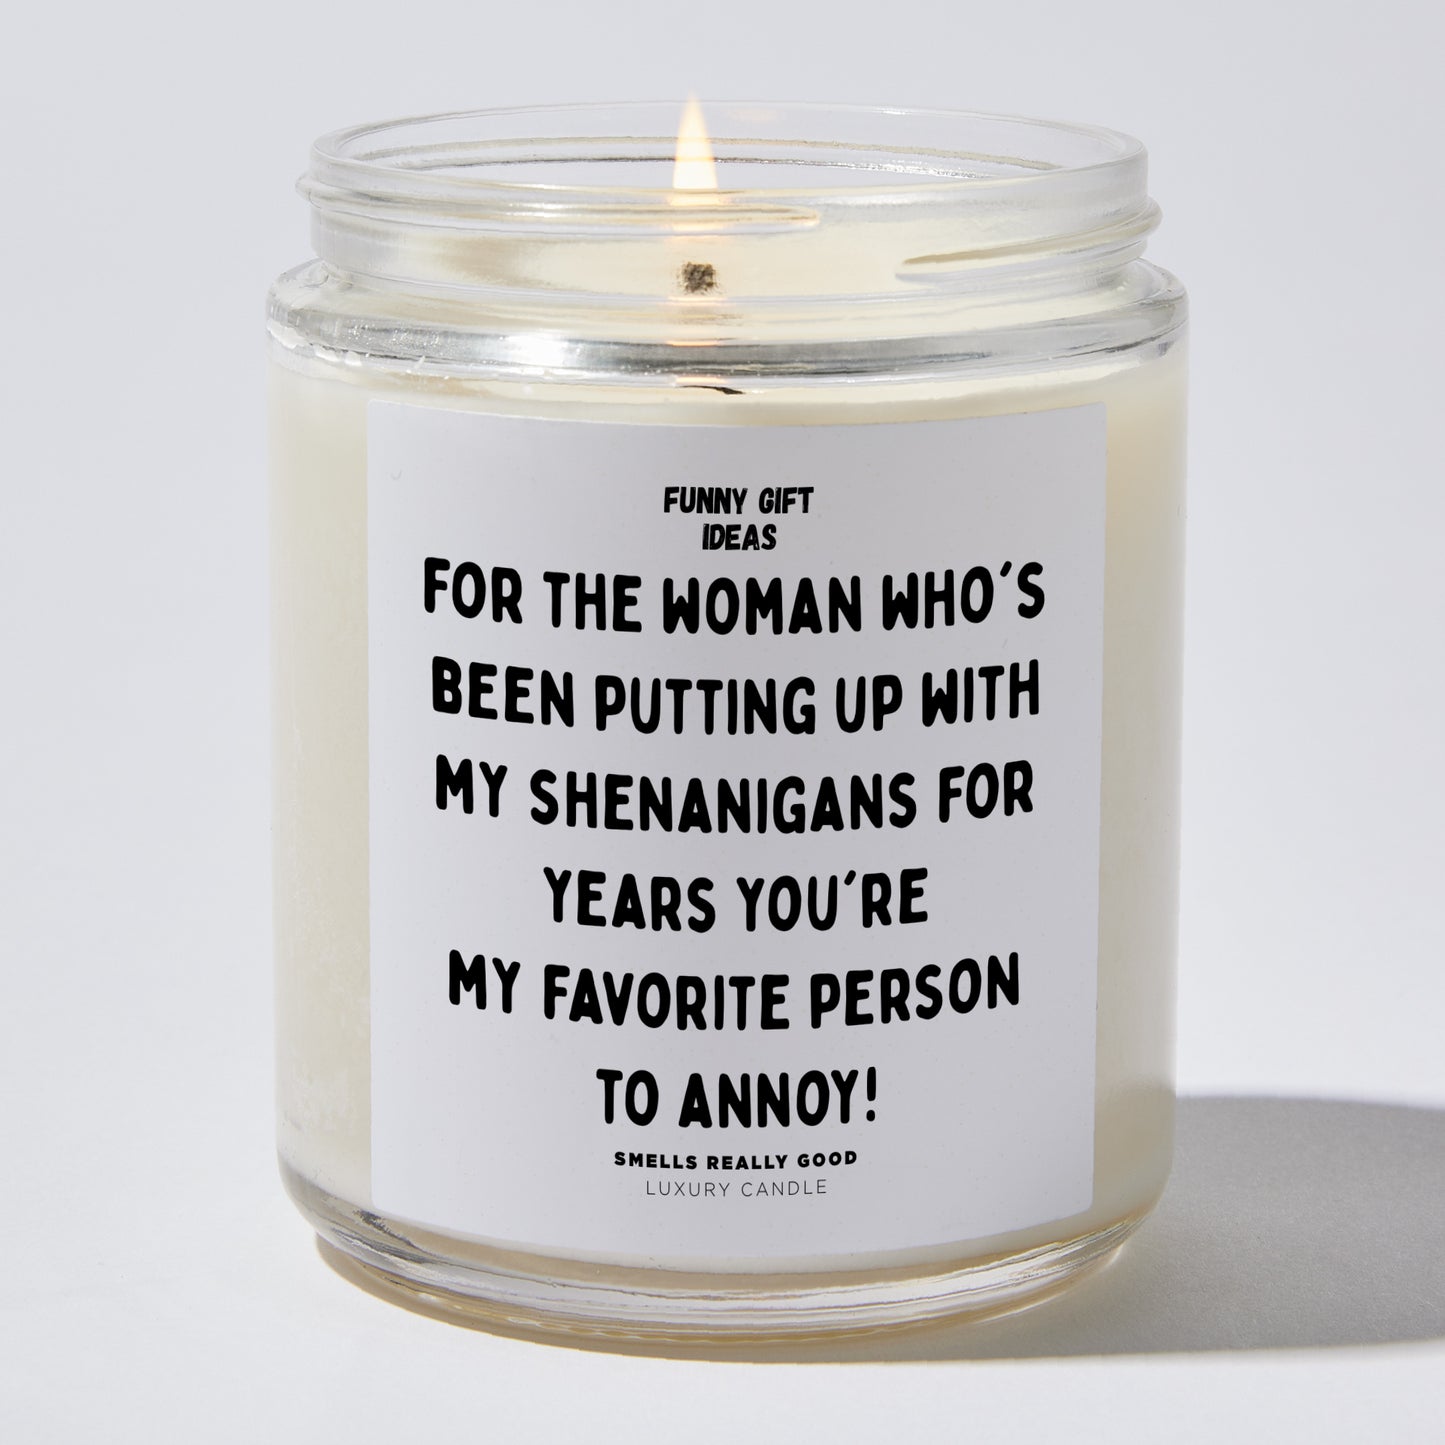 Anniversary Present - For the Woman Who's Been Putting Up With My Shenanigans for Years. You're My Favorite Person to Annoy! - Candle